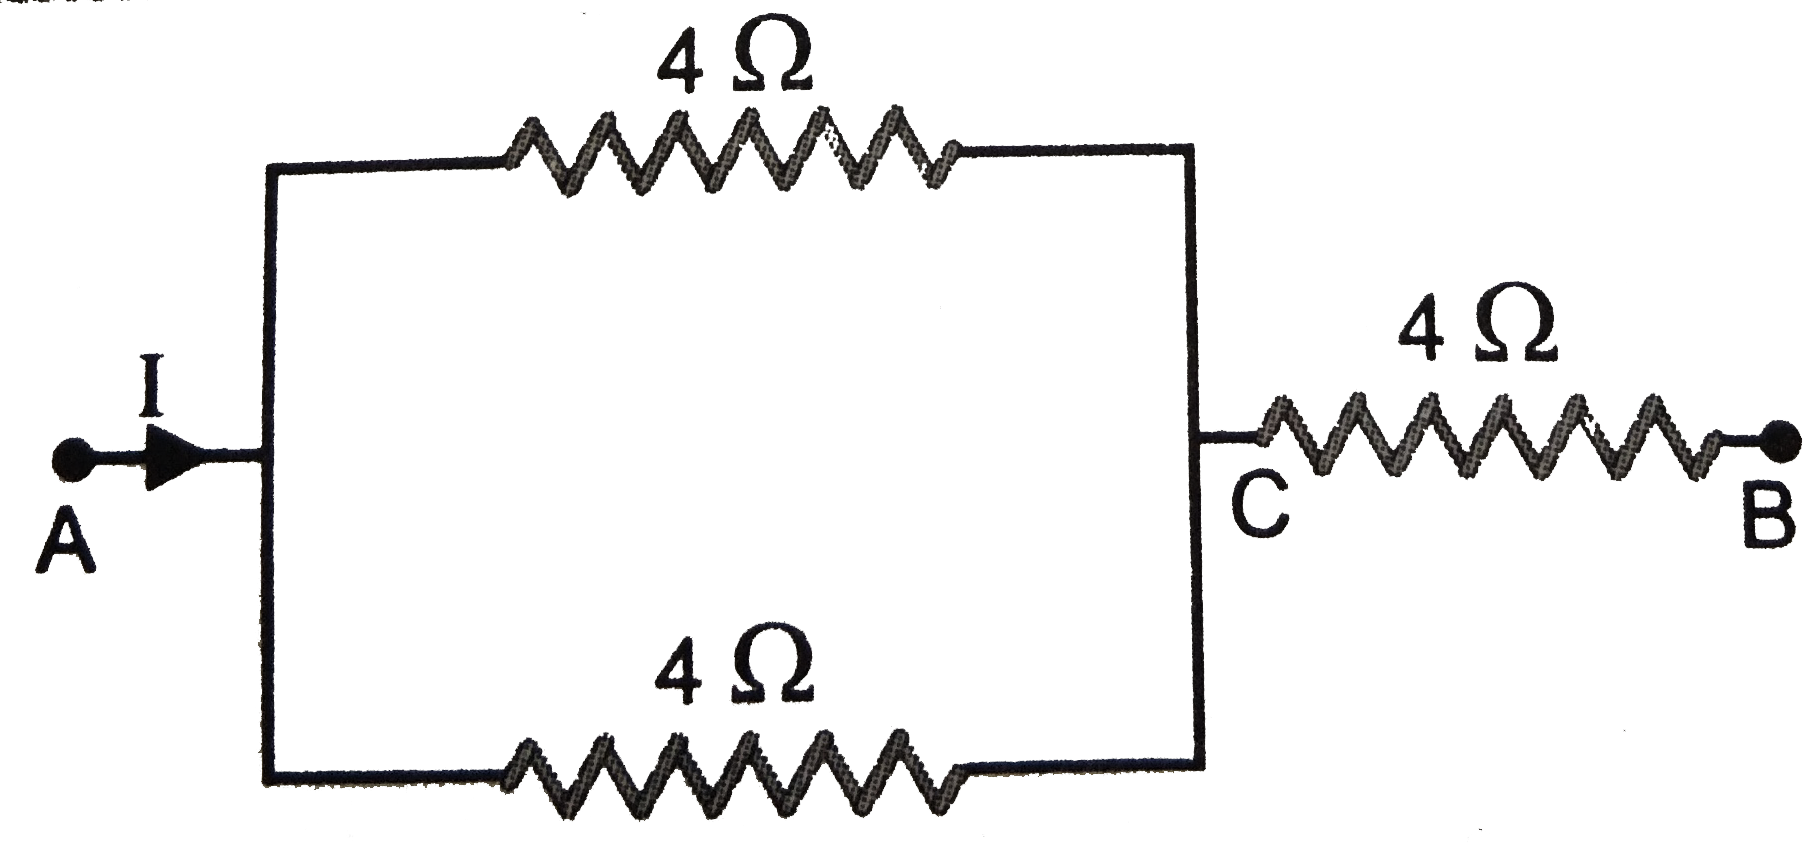 The resistance of each of the three wires joined as shown in figure is 4 Omega and each one can have a maximum power of 20 watt (otherwise it will melt). What maximum power will the whole circuit dissipate ?